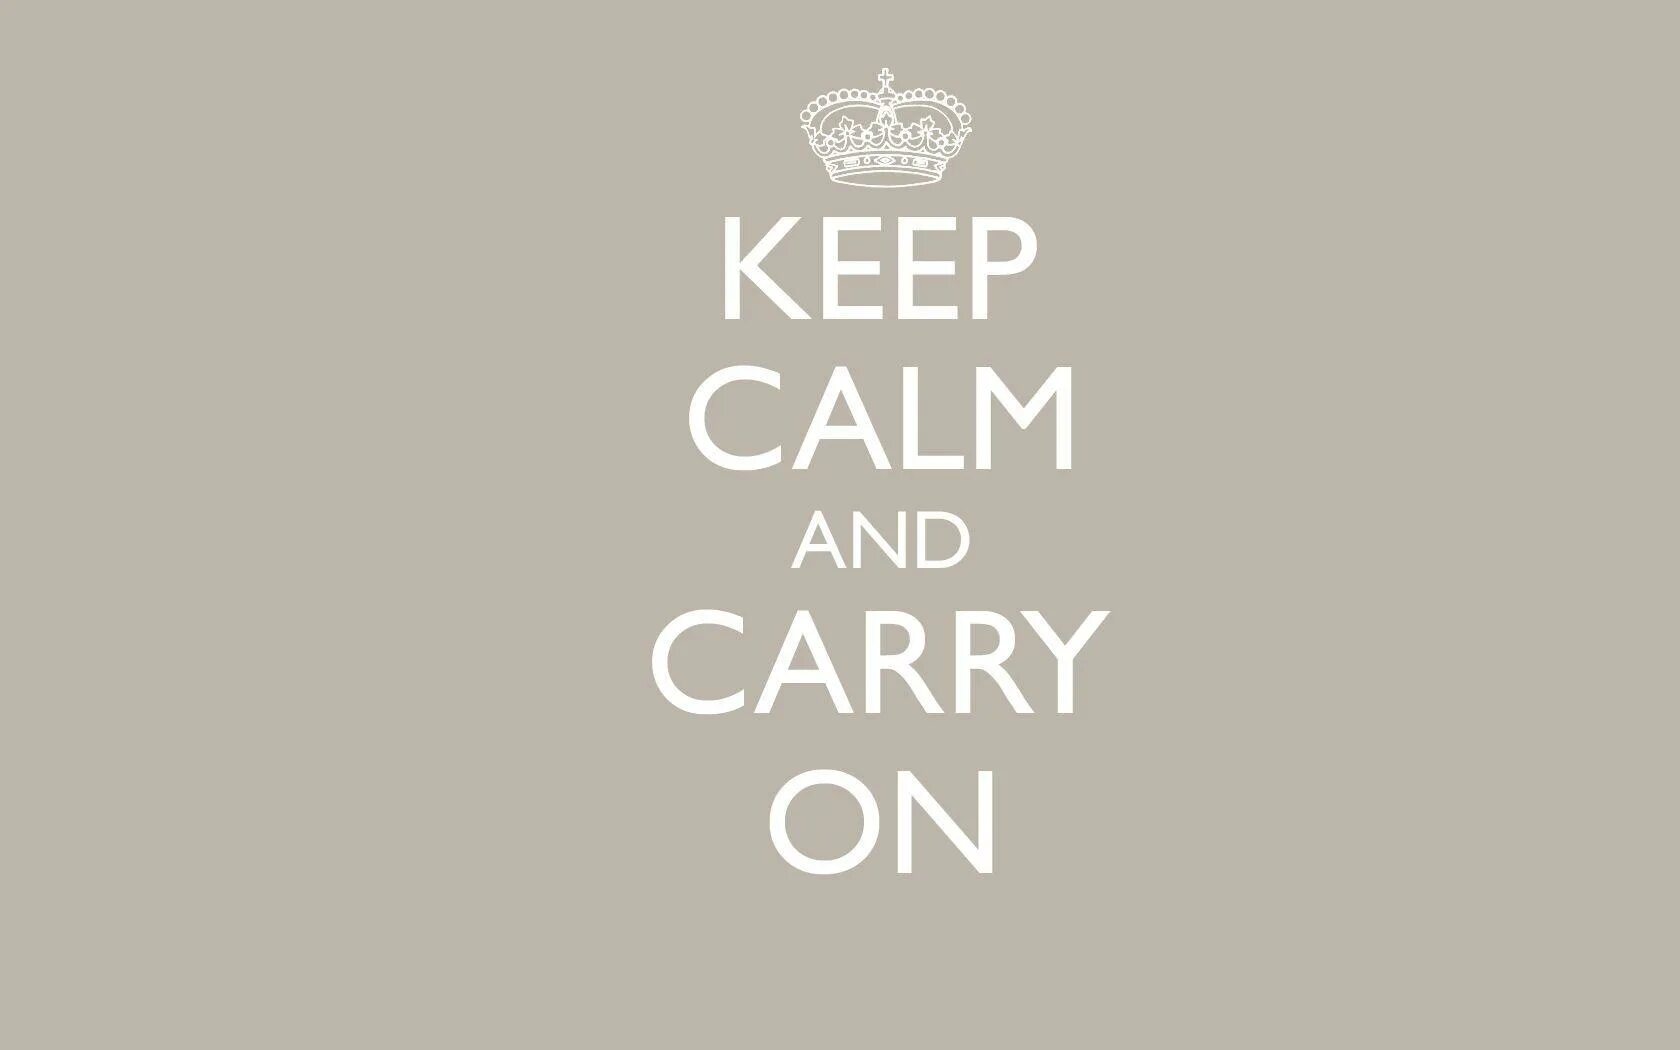 Keep Calm and carry on. Keep Calm and carry on обои. Keep Calm and carry on Мем. Keep Calm and carry on плакат.